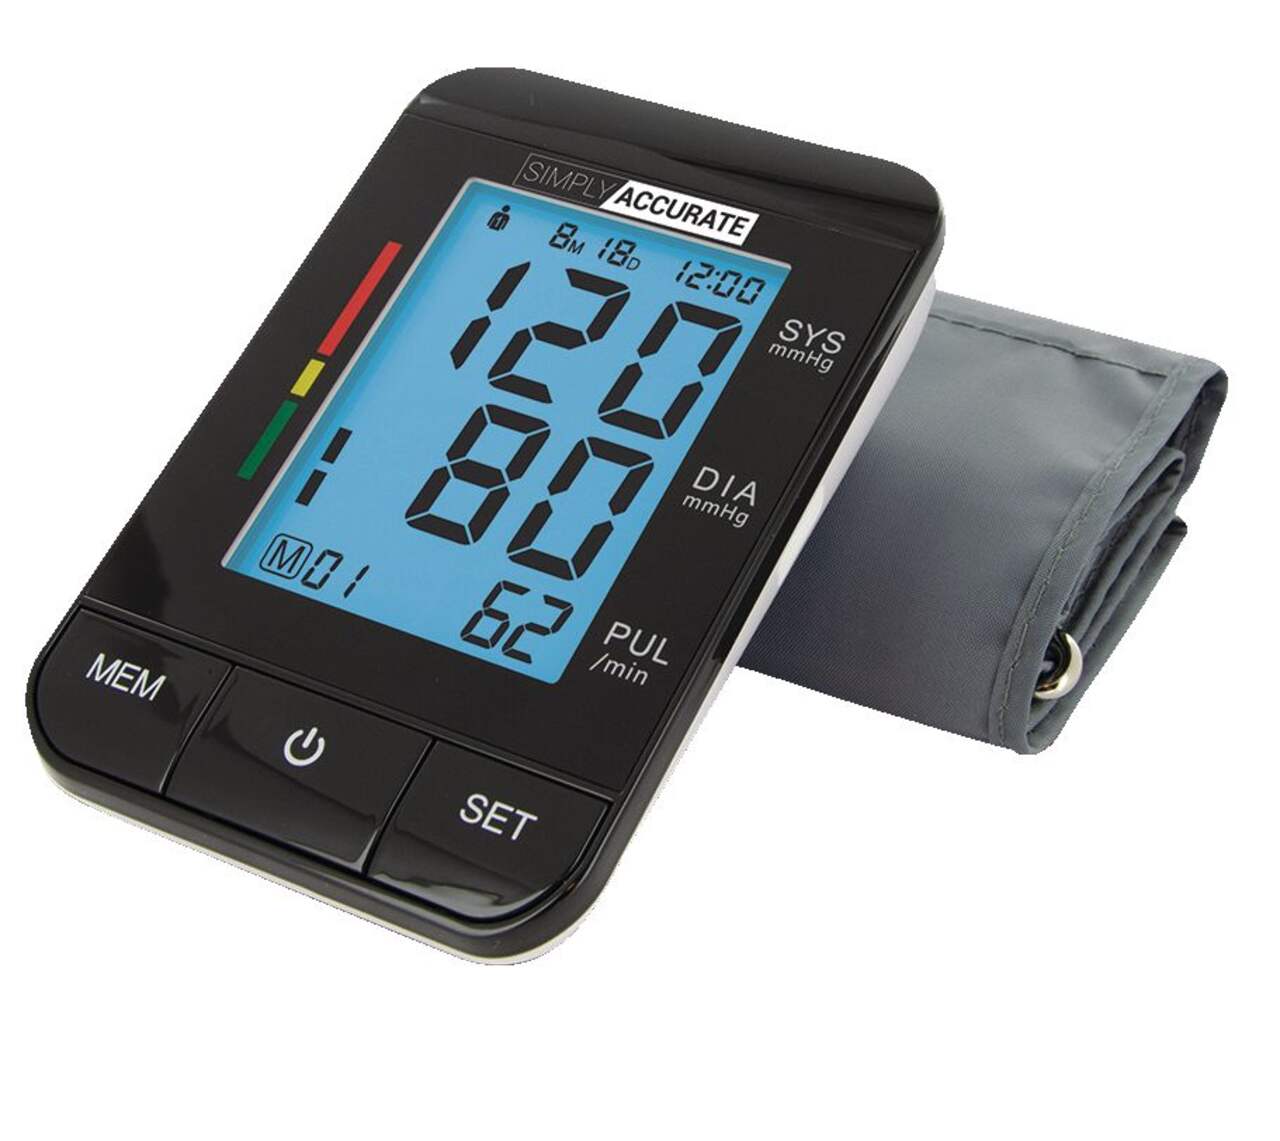 https://media-www.canadiantire.ca/product/living/personal-garment-care/personal-care/0439171/simply-accurate-premium-plus-blood-pressure-monitor--c2a90ad3-511e-439a-8c43-a819b814f226-jpgrendition.jpg?imdensity=1&imwidth=640&impolicy=mZoom